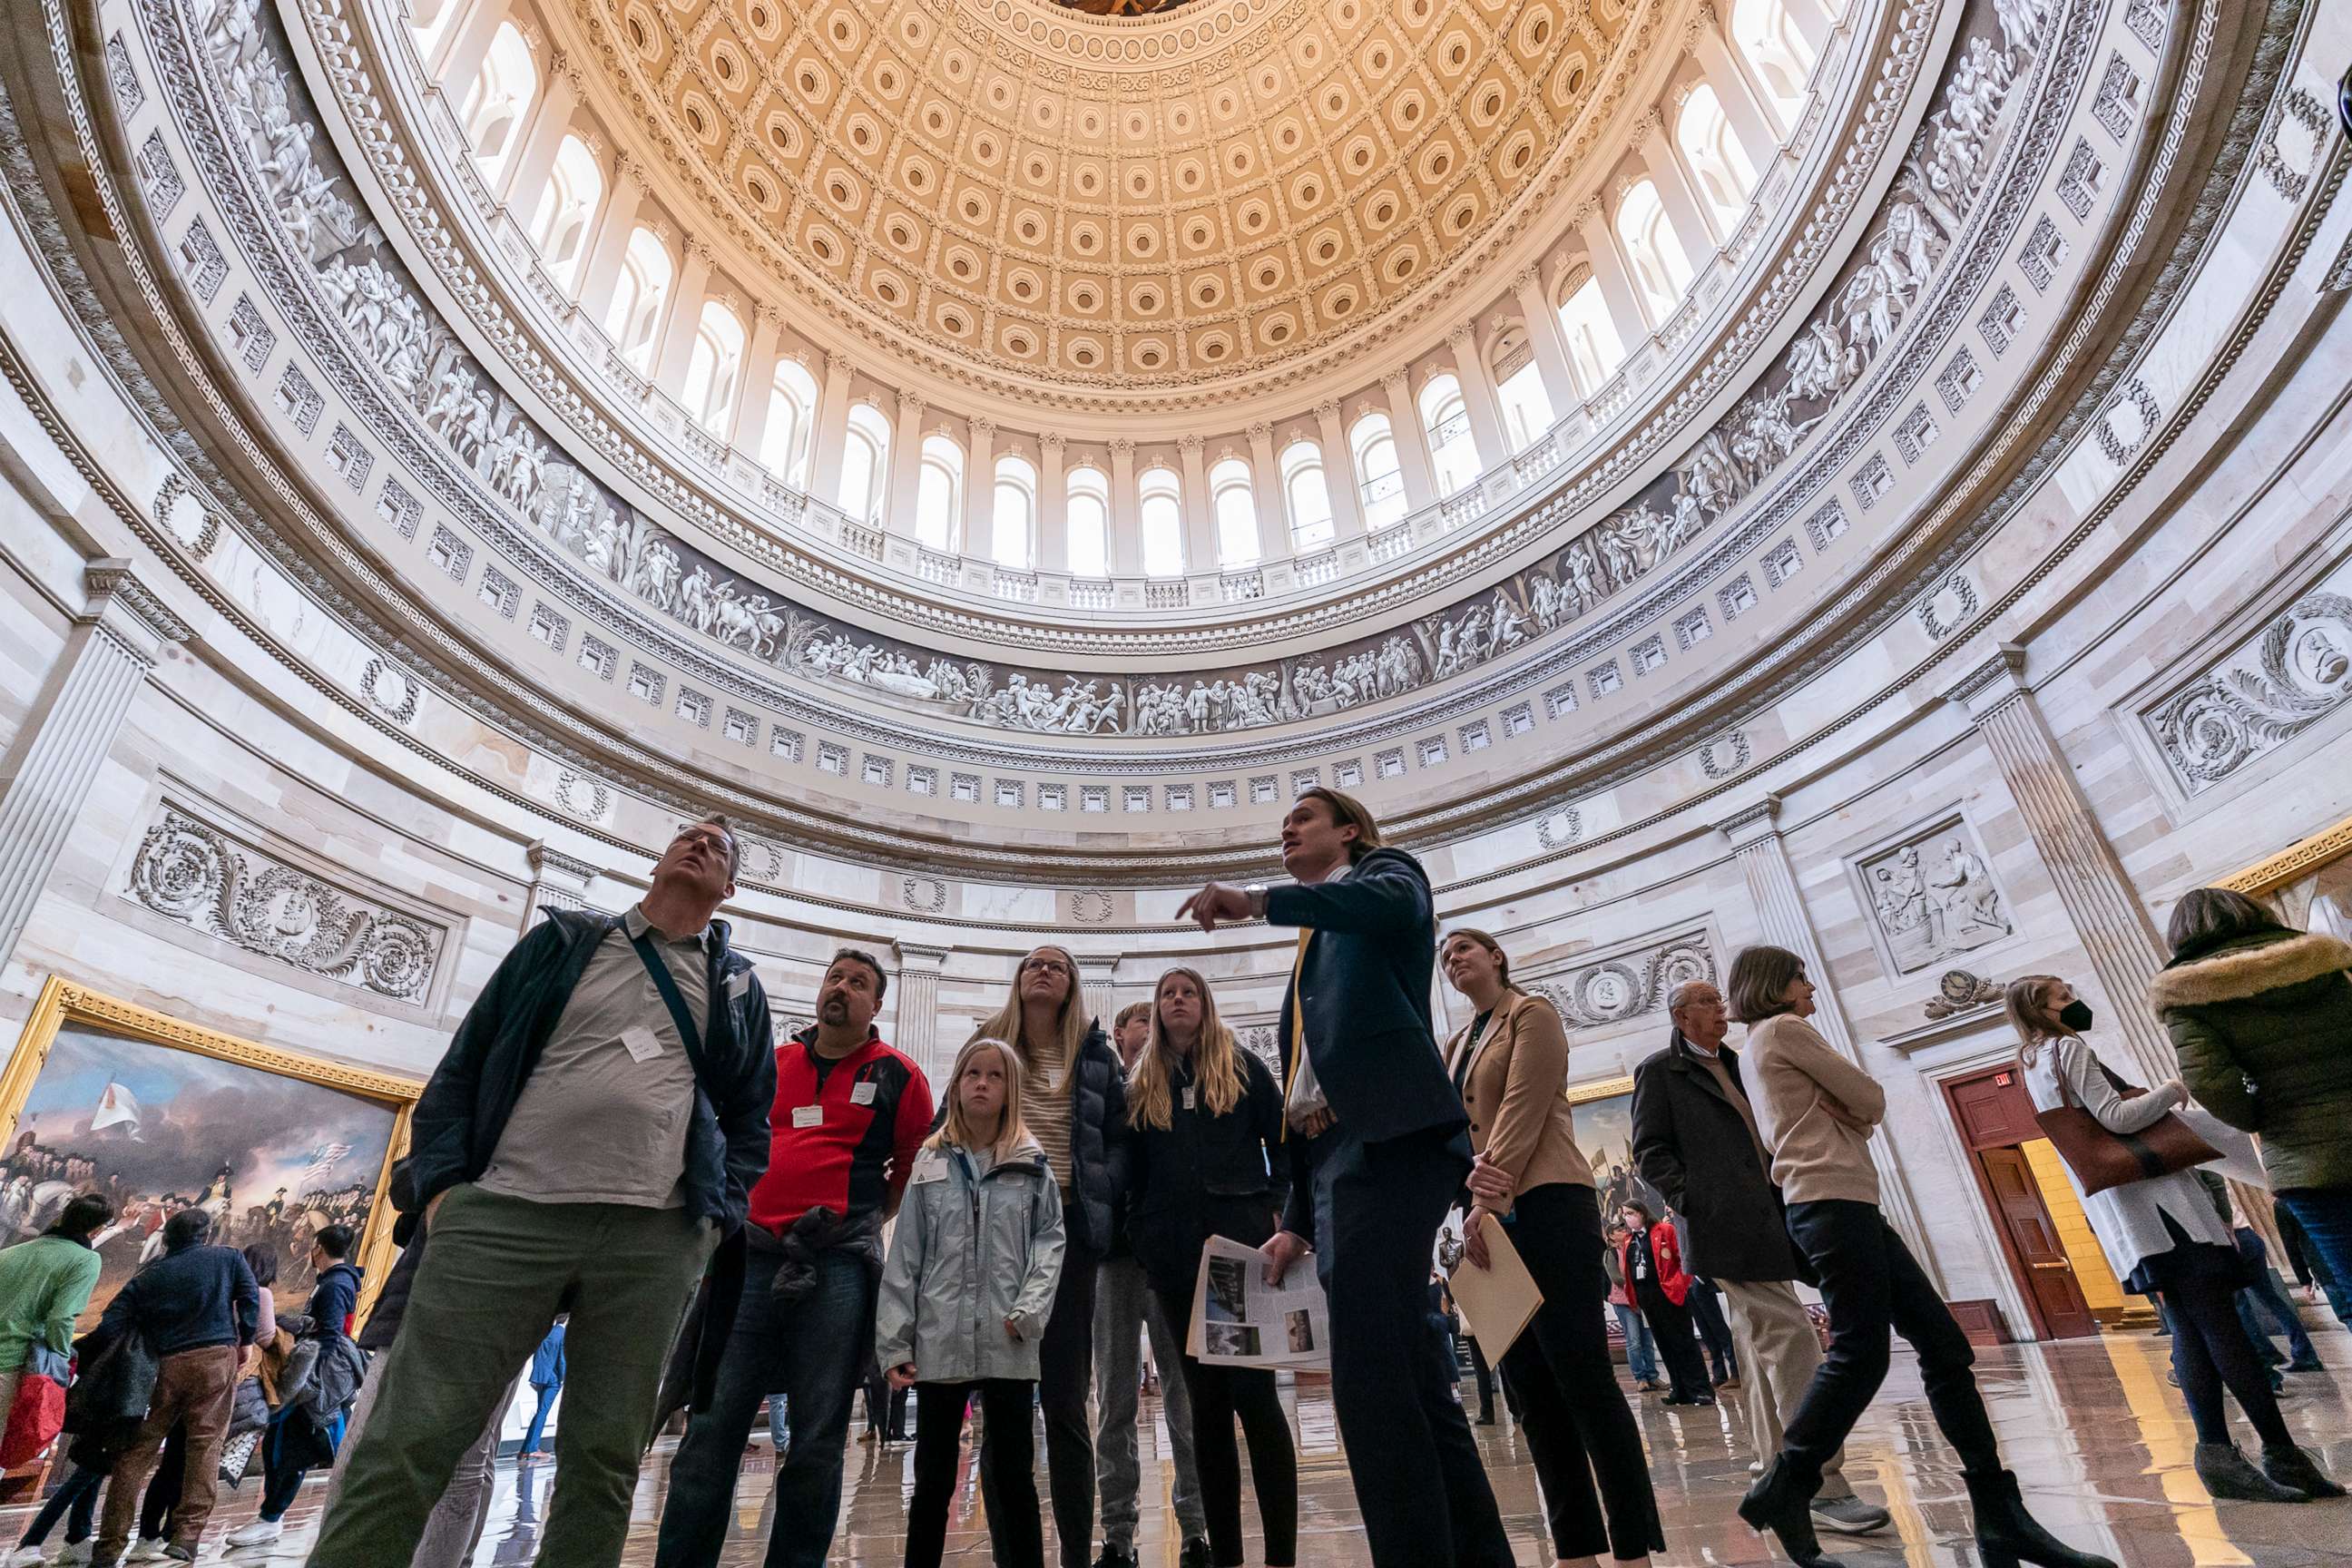 PHOTO: Tourists view the Rotunda as the Capitol opens to visitors for the first time since the beginning of the COVID-19 outbreak in early 2020, in Washington, D.C., March 28, 2022. 